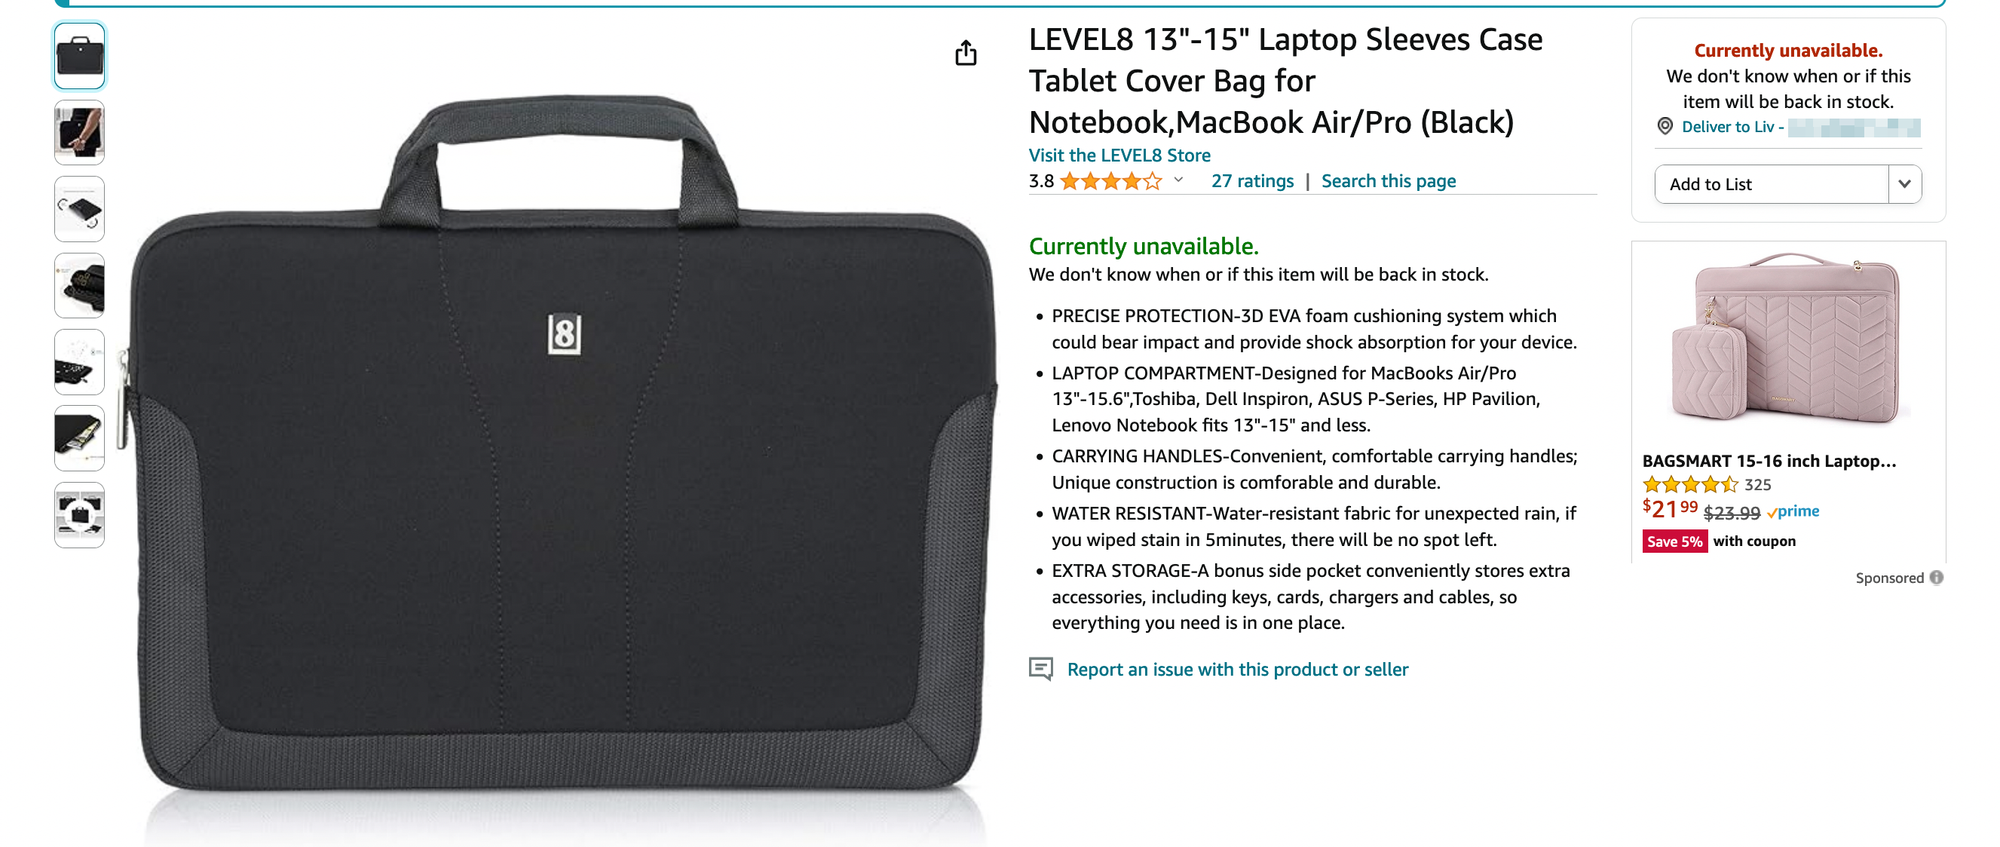 screenshot of Amazon, "LEVEL8 13"-15" Laptop Sleeves Case Tablet Cover Bag for Notebook, MacBook Air/Pro (Black), Currently unavailable."